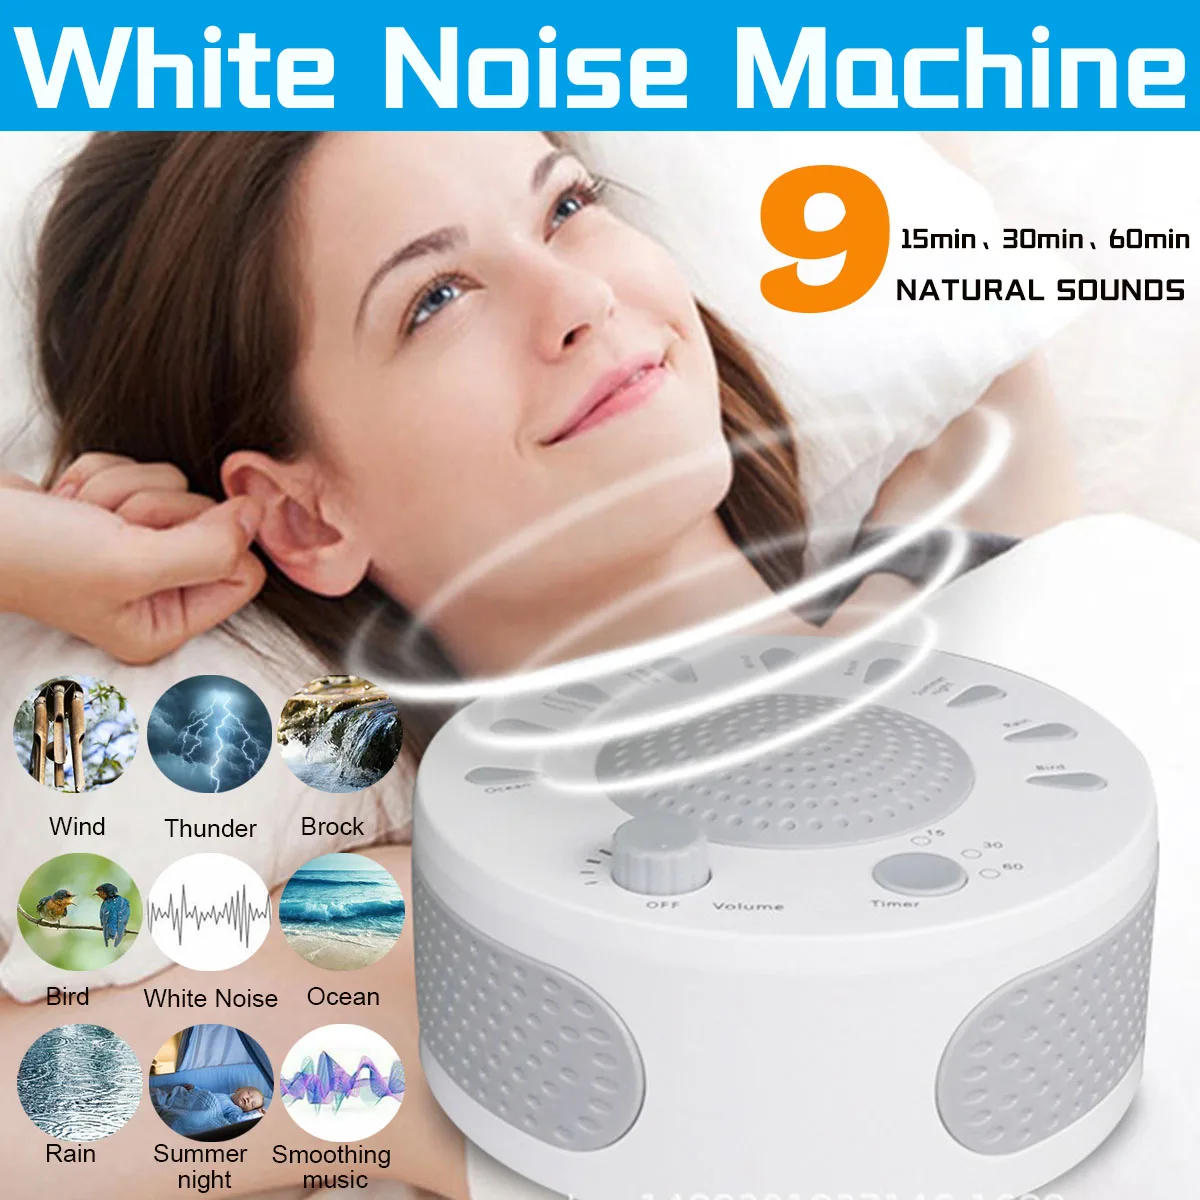 Relaxation,USB Powered Evenlyao Sleep White Noise Machine Baby Sleep Instrument,Soothing Natural Sounds Therapy For Baby Adults Office 